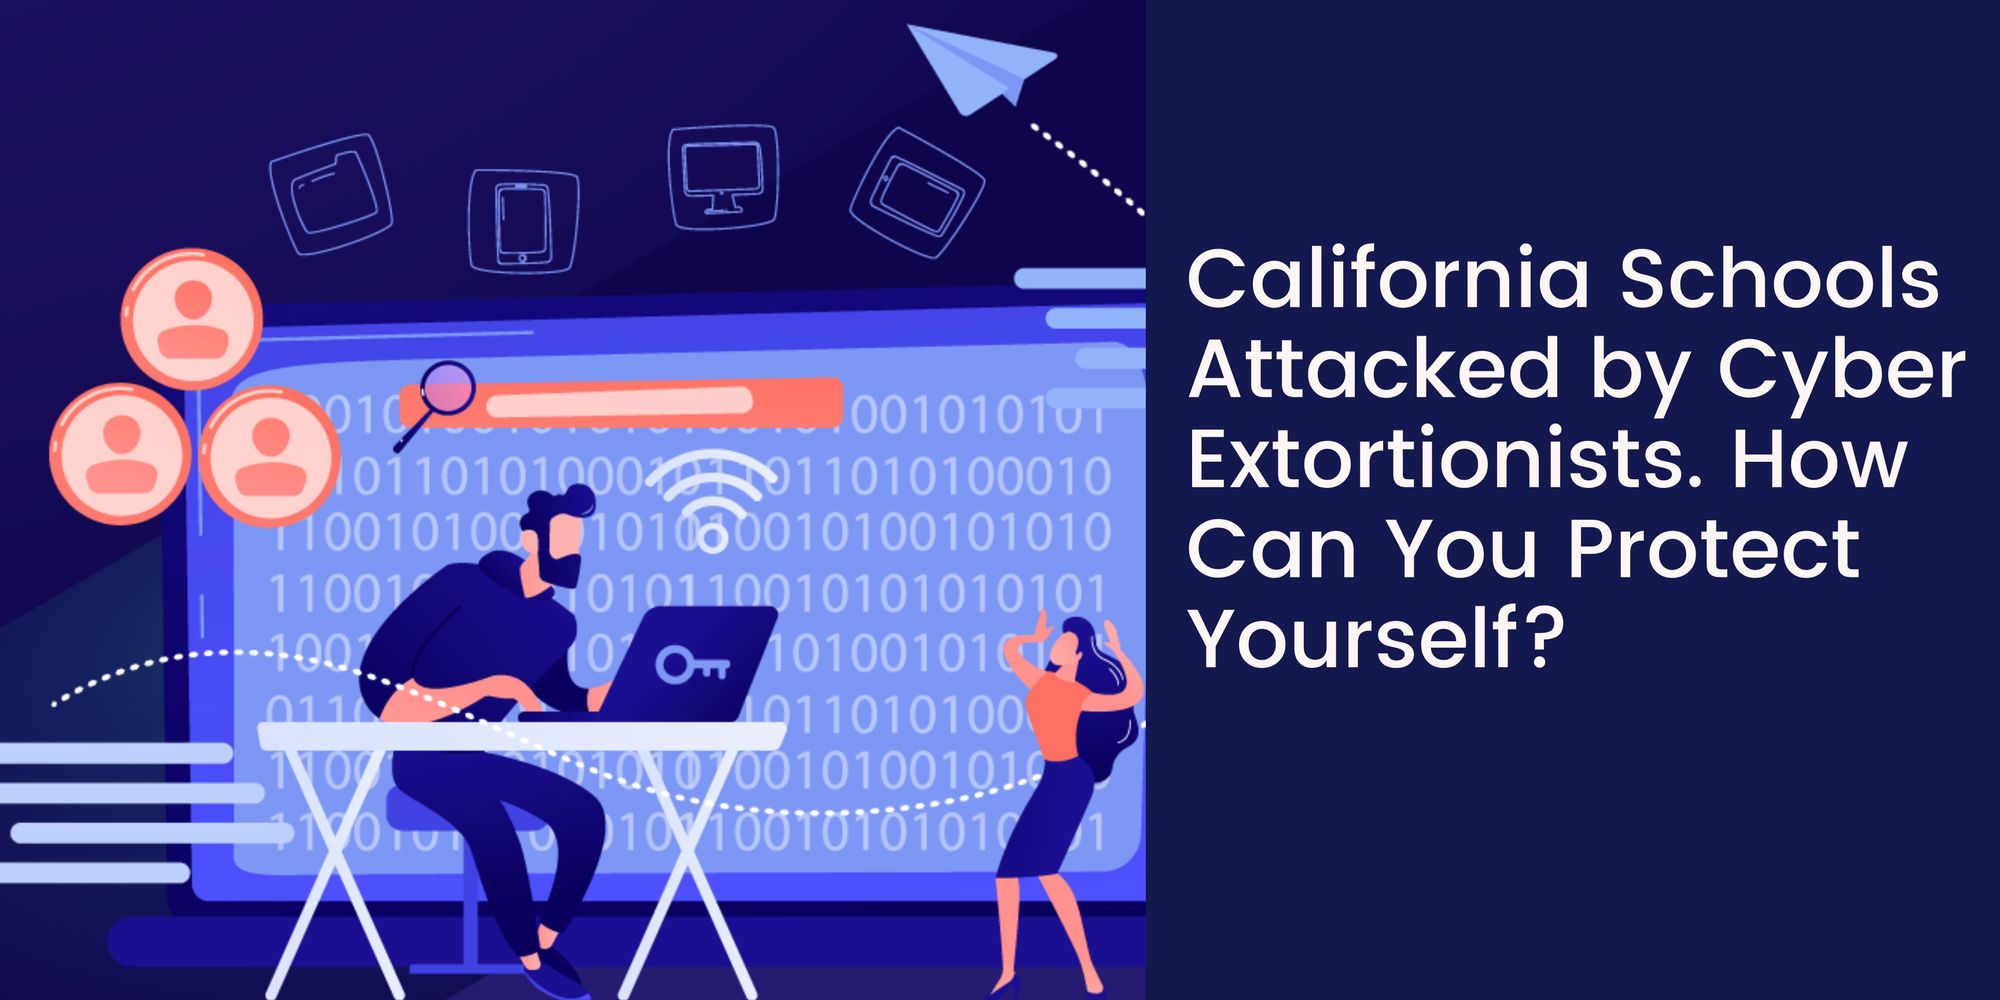 California Schools Attacked by Cyber Extortionists. How Can You Protect Yourself?